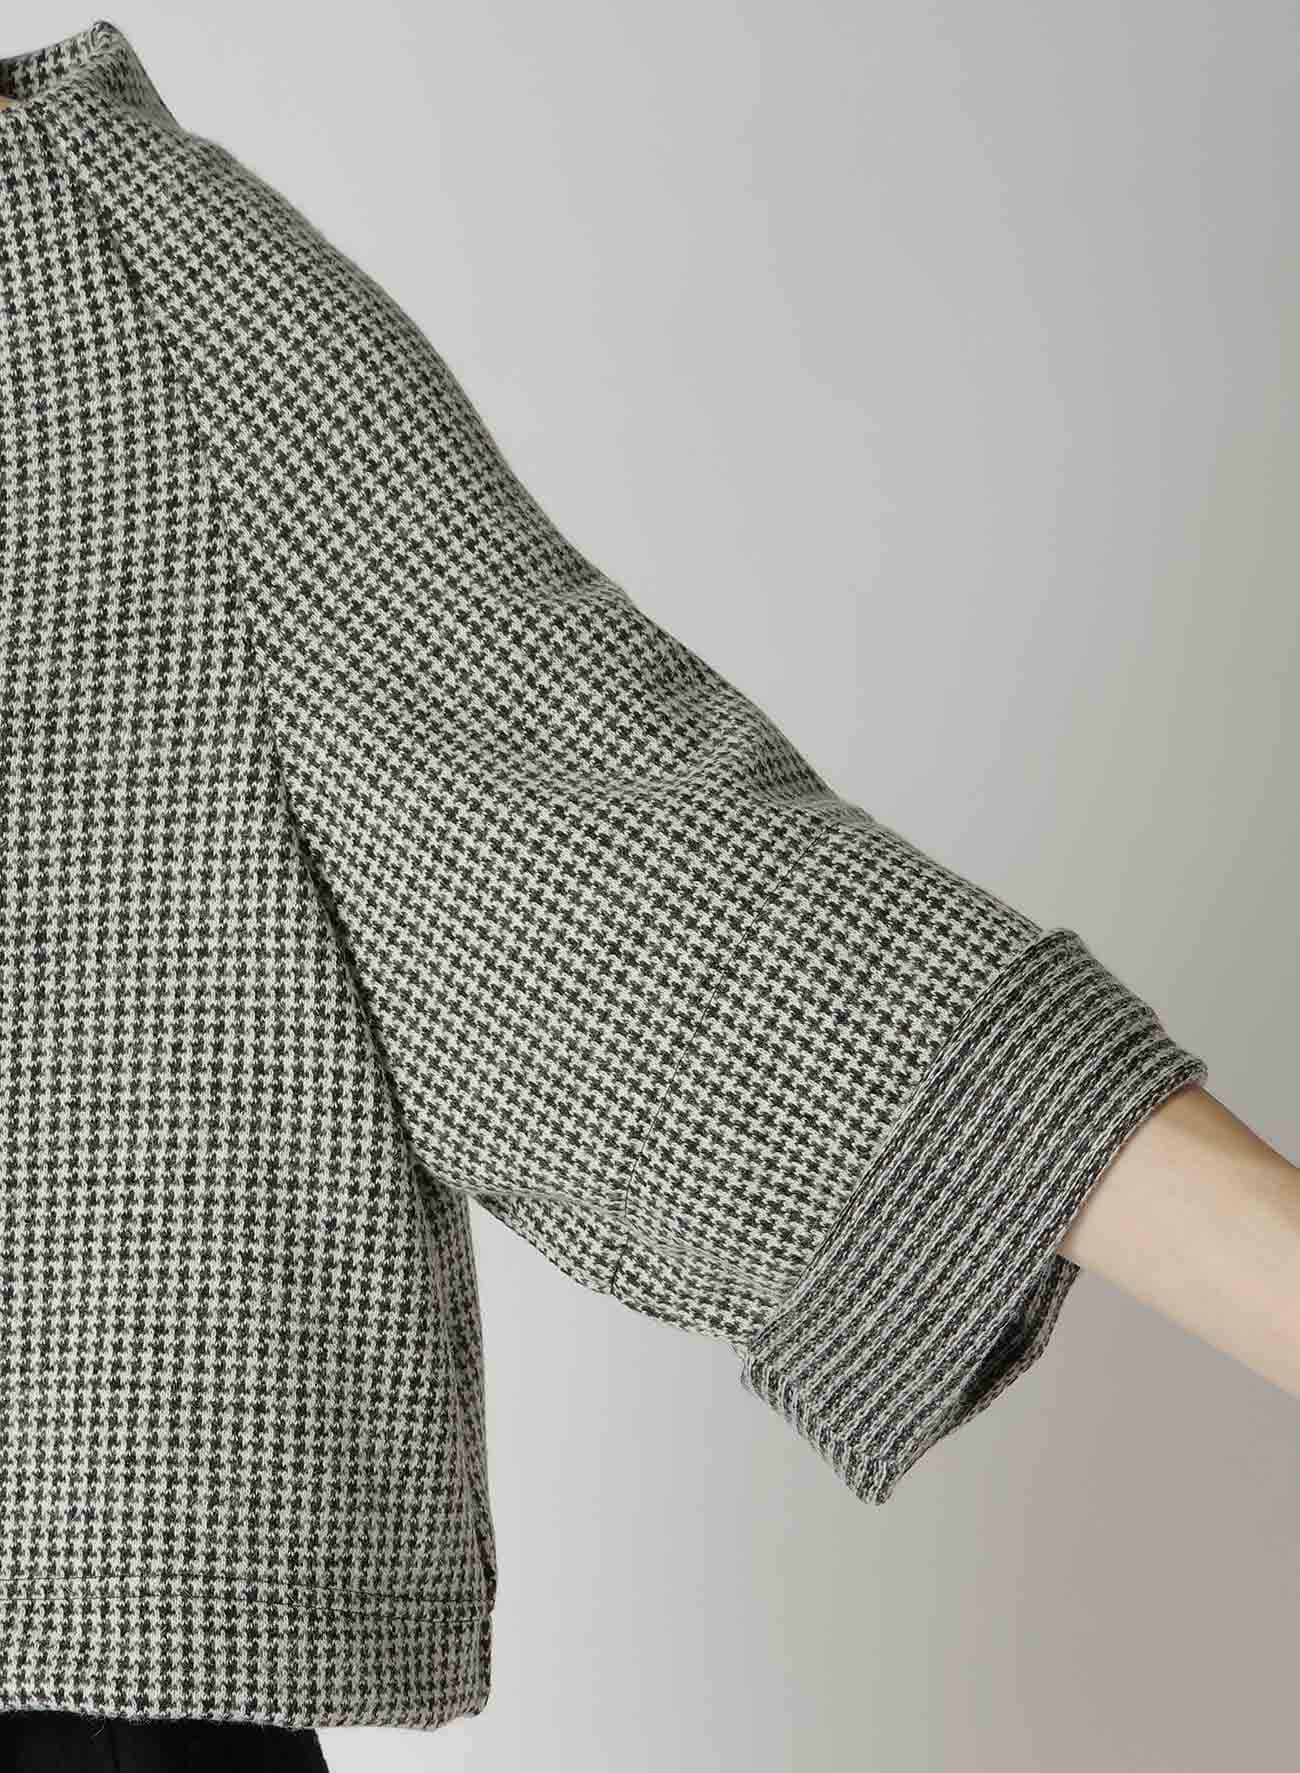 HOUNDSTOOTH JACQUARD 4-BUTTON JACKET(S Off White x Black): Y's